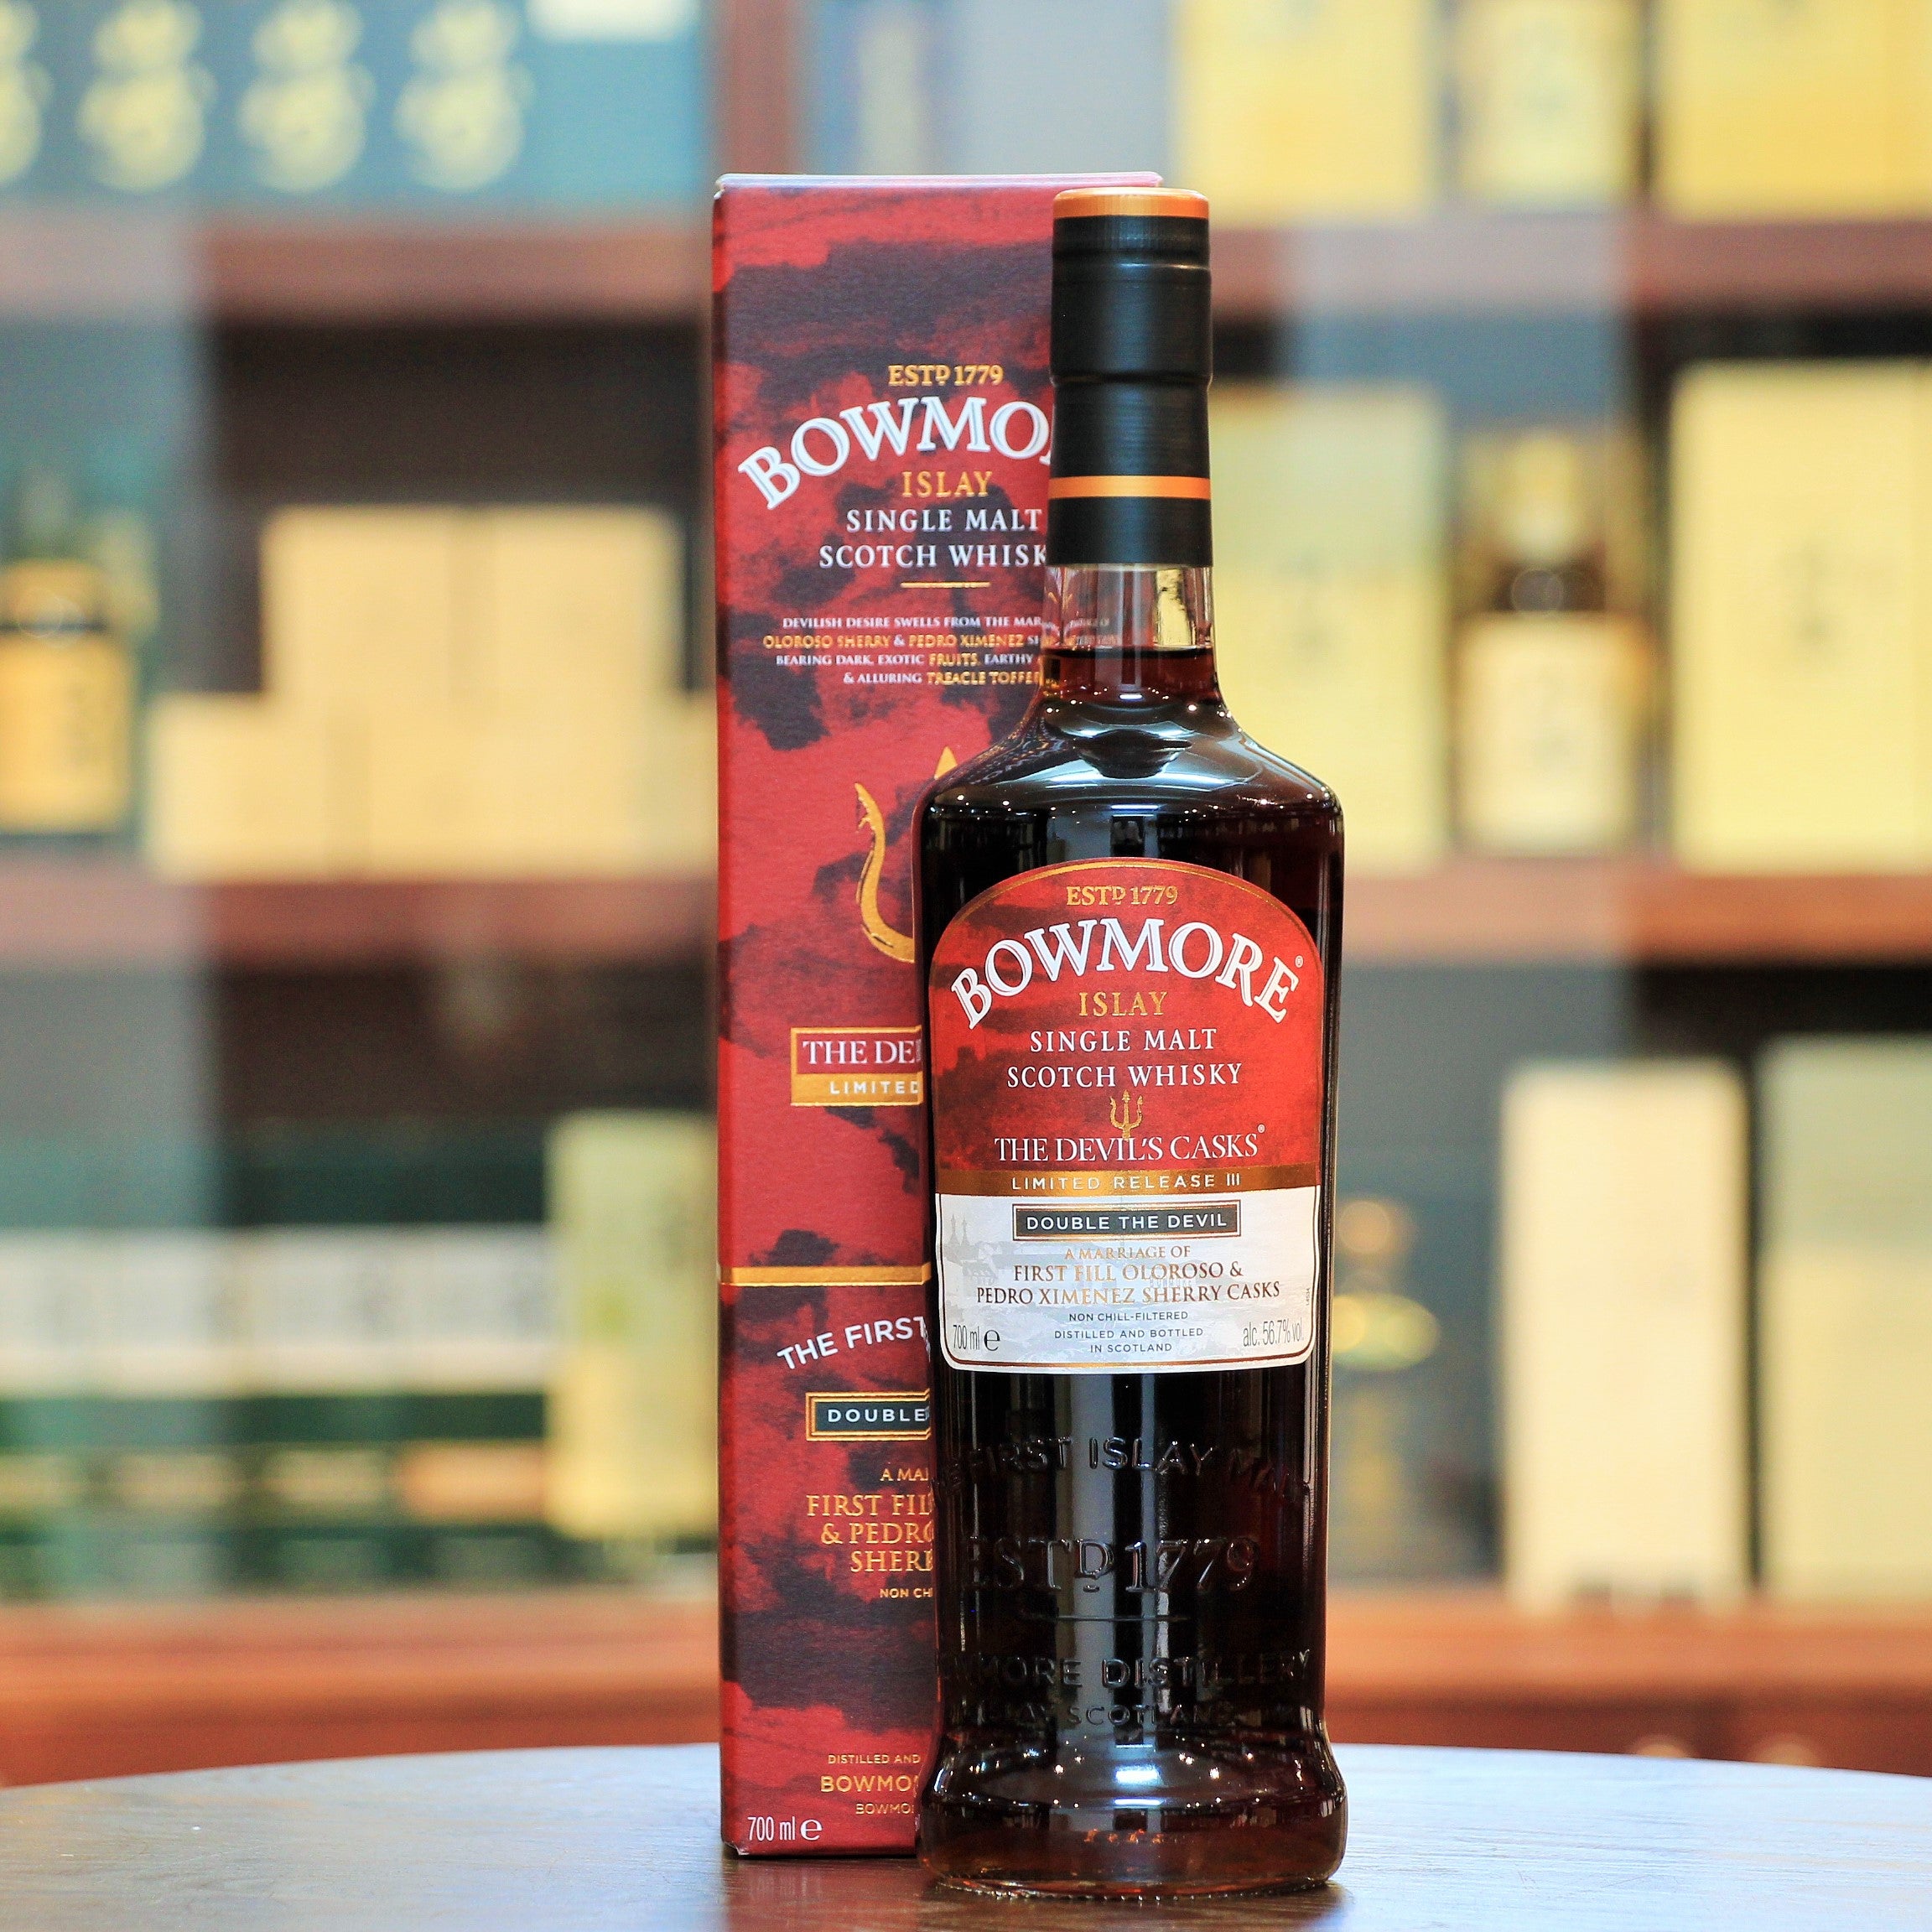 Bowmore Devils Cask III Limited Third Release Double The Devil, the final bottling of the Devils Cask release in 2015 combines the flavours of release 1 & 2 by using 1st Fill Oloroso & Pedro Ximénez Sherry Casks. This bottling is only available as a set along with Batch 1 & Batch 2. 